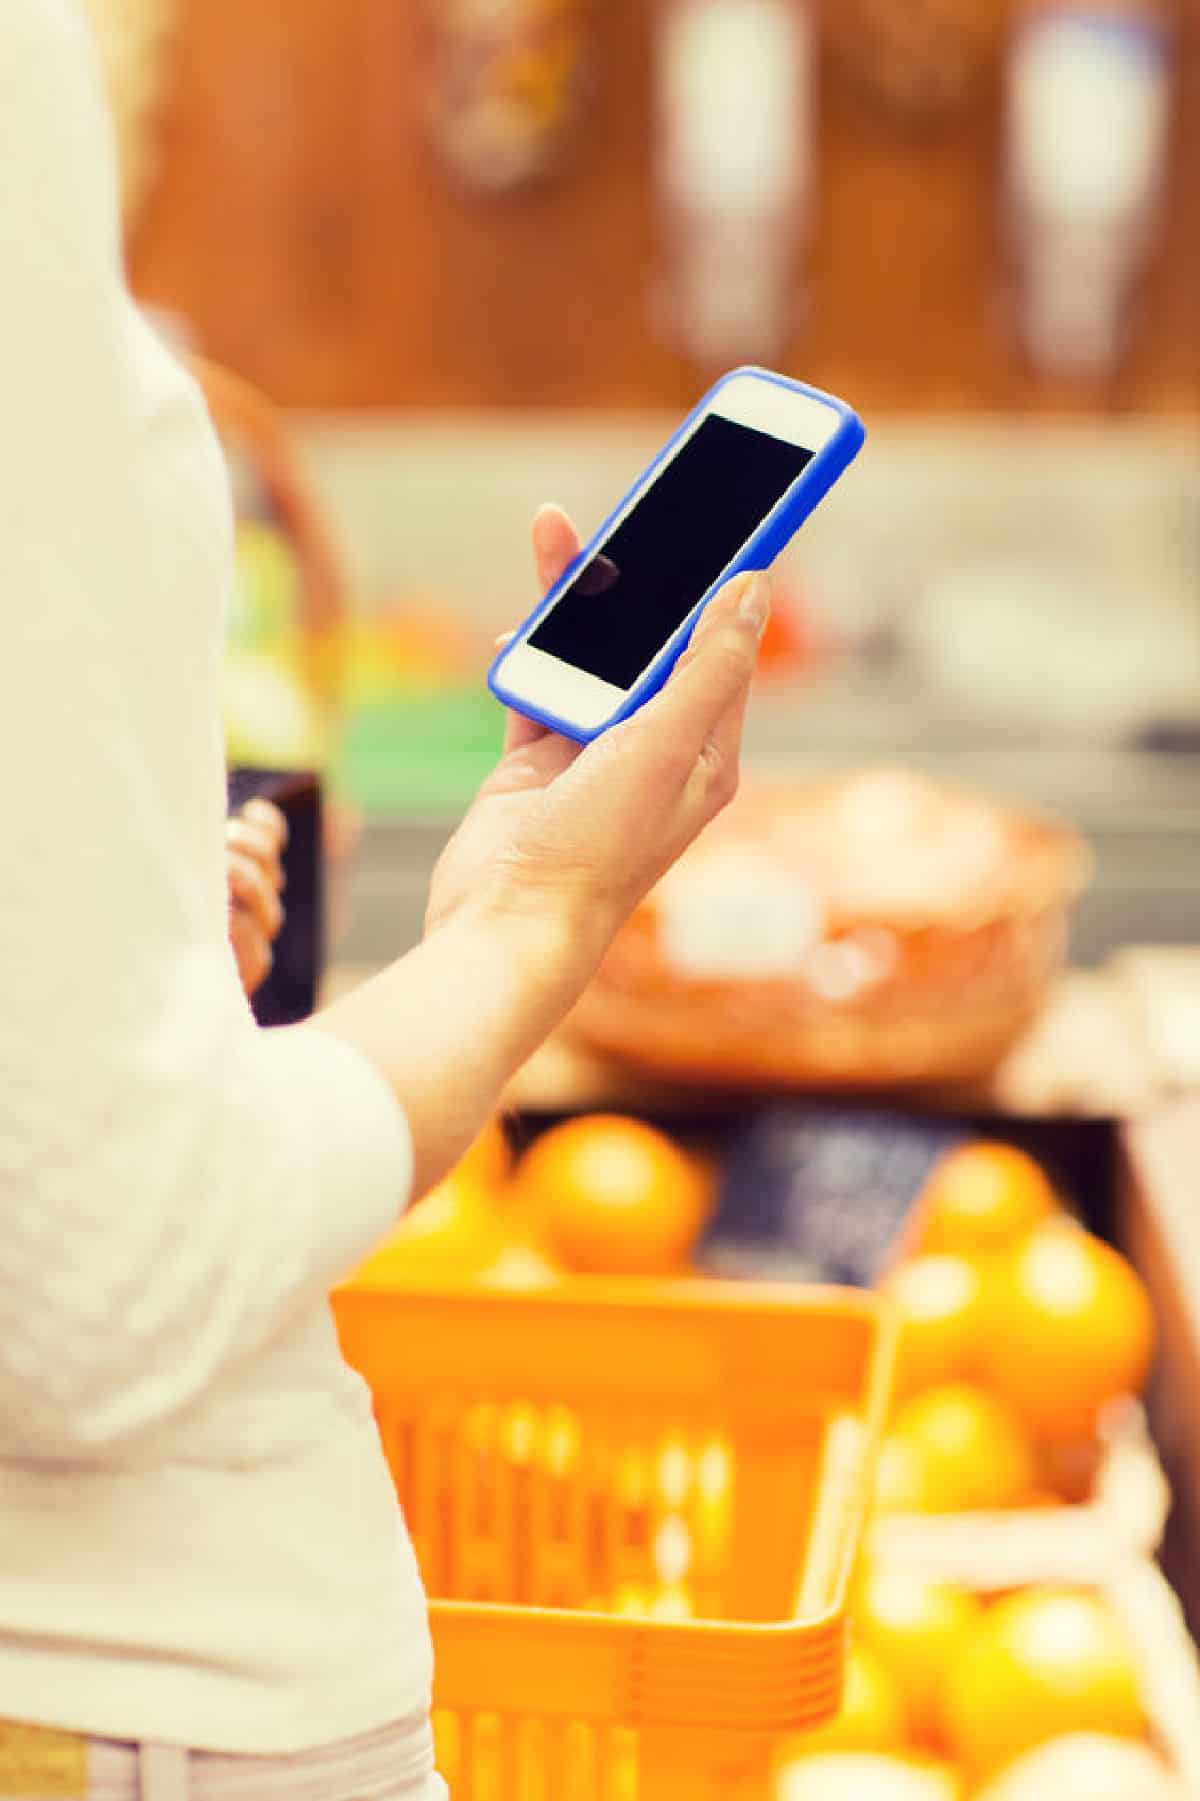 A lady looking at her smart phone while grocery shopping 